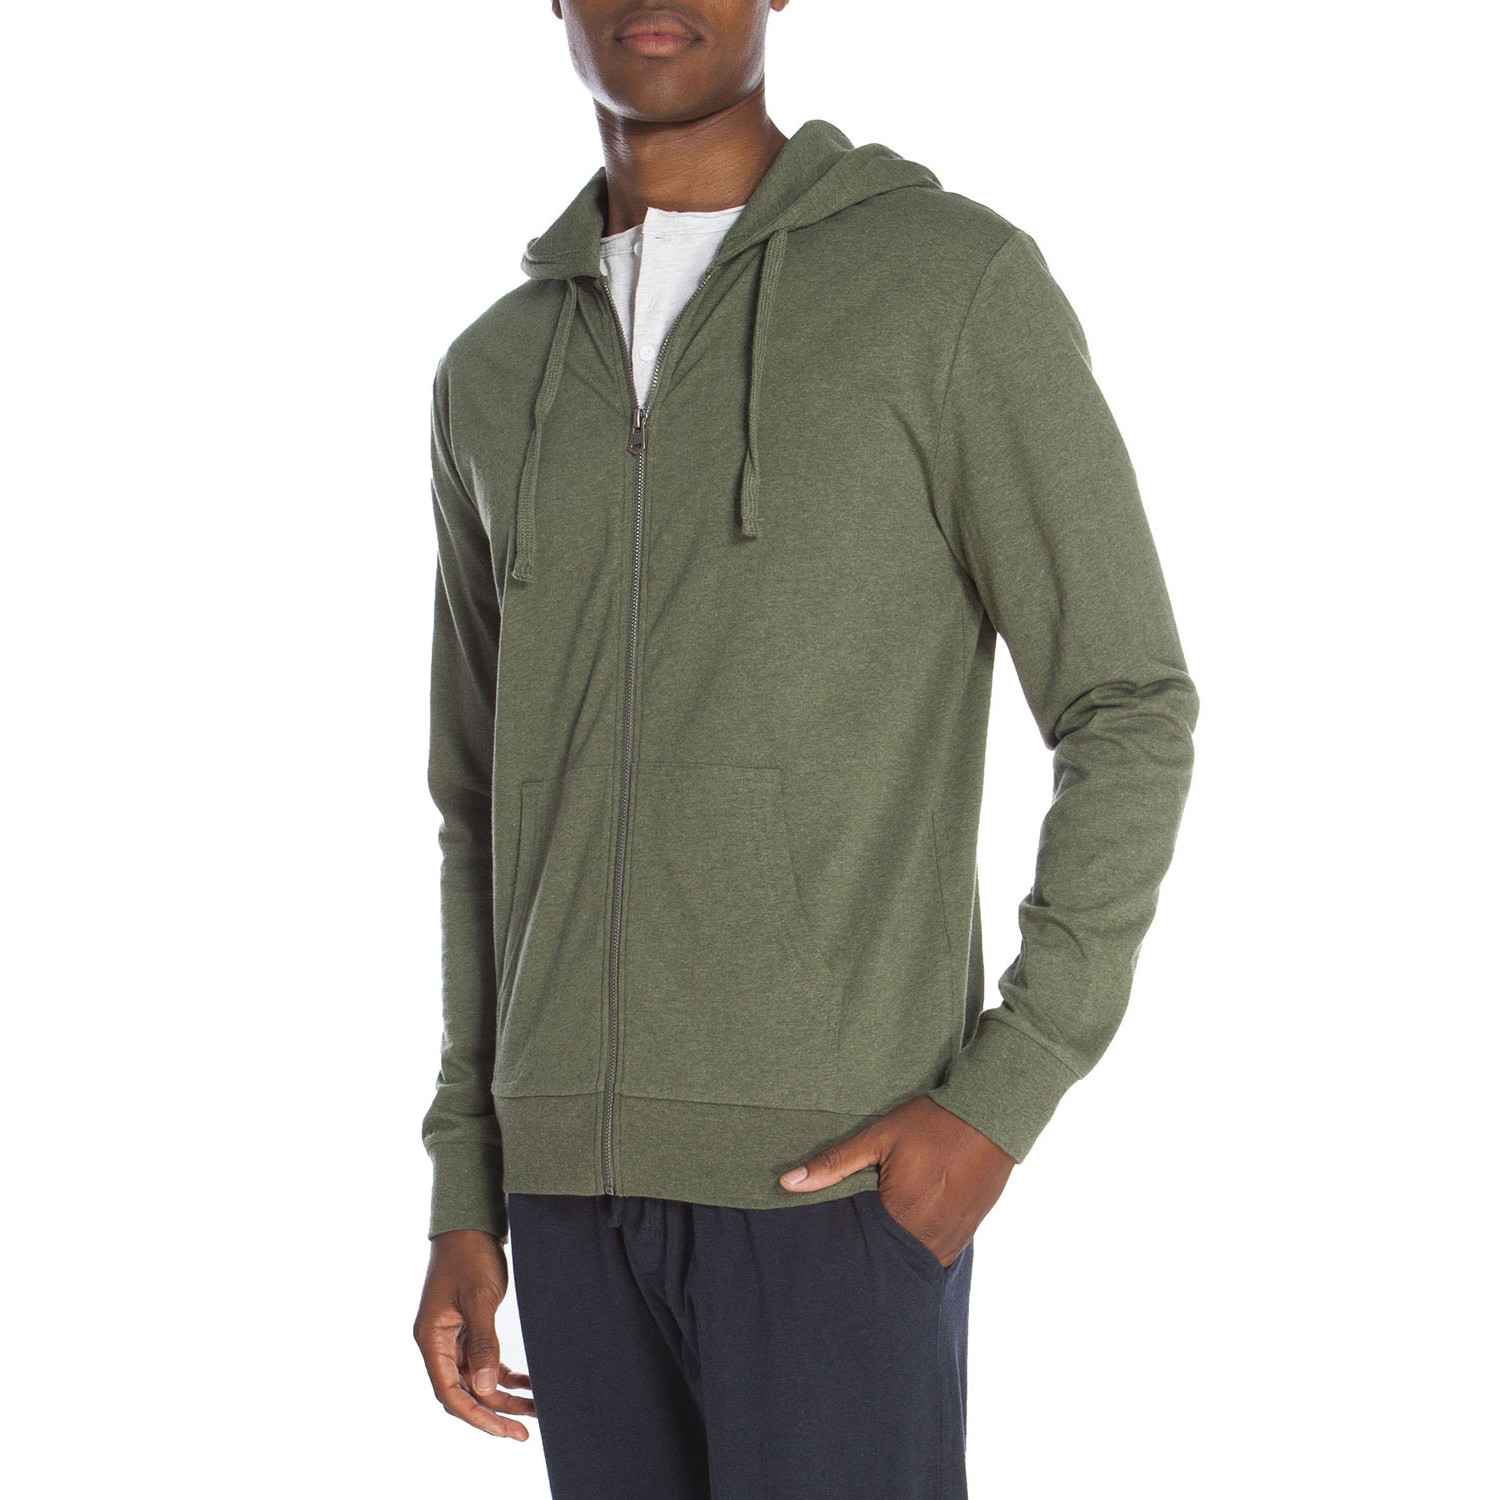 Light Weight Zip Up Hoodie // Heather Green (S) - Unsimply Stitched ...